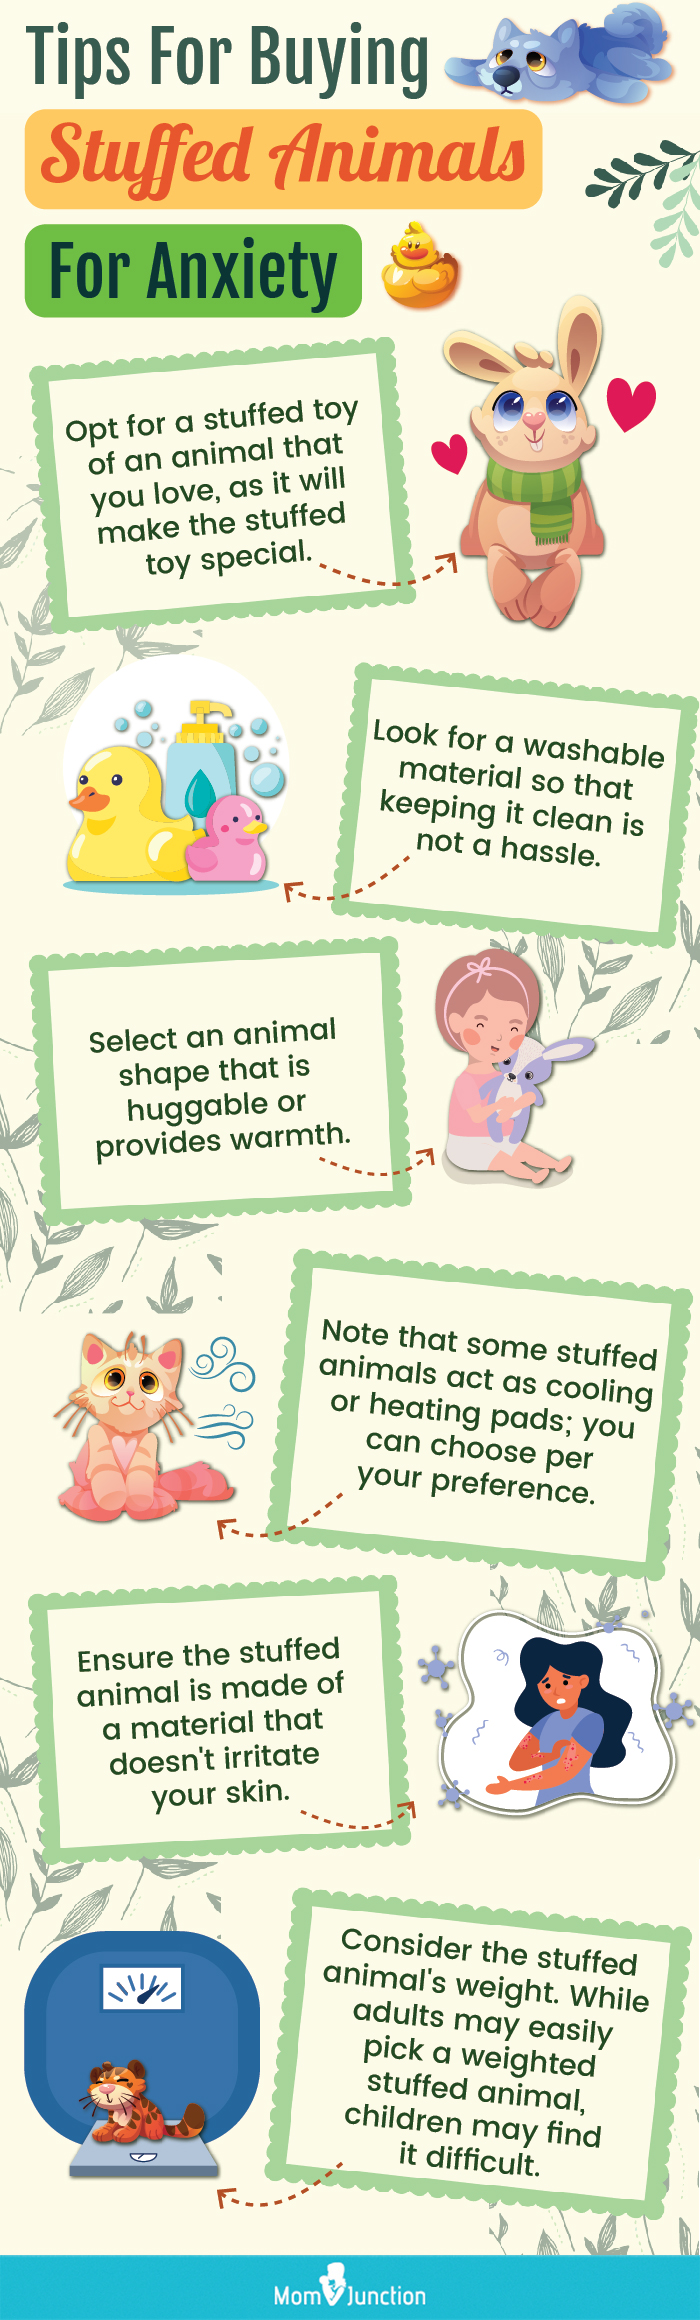 Tips for Buying Stuffed Animals for Anxiety